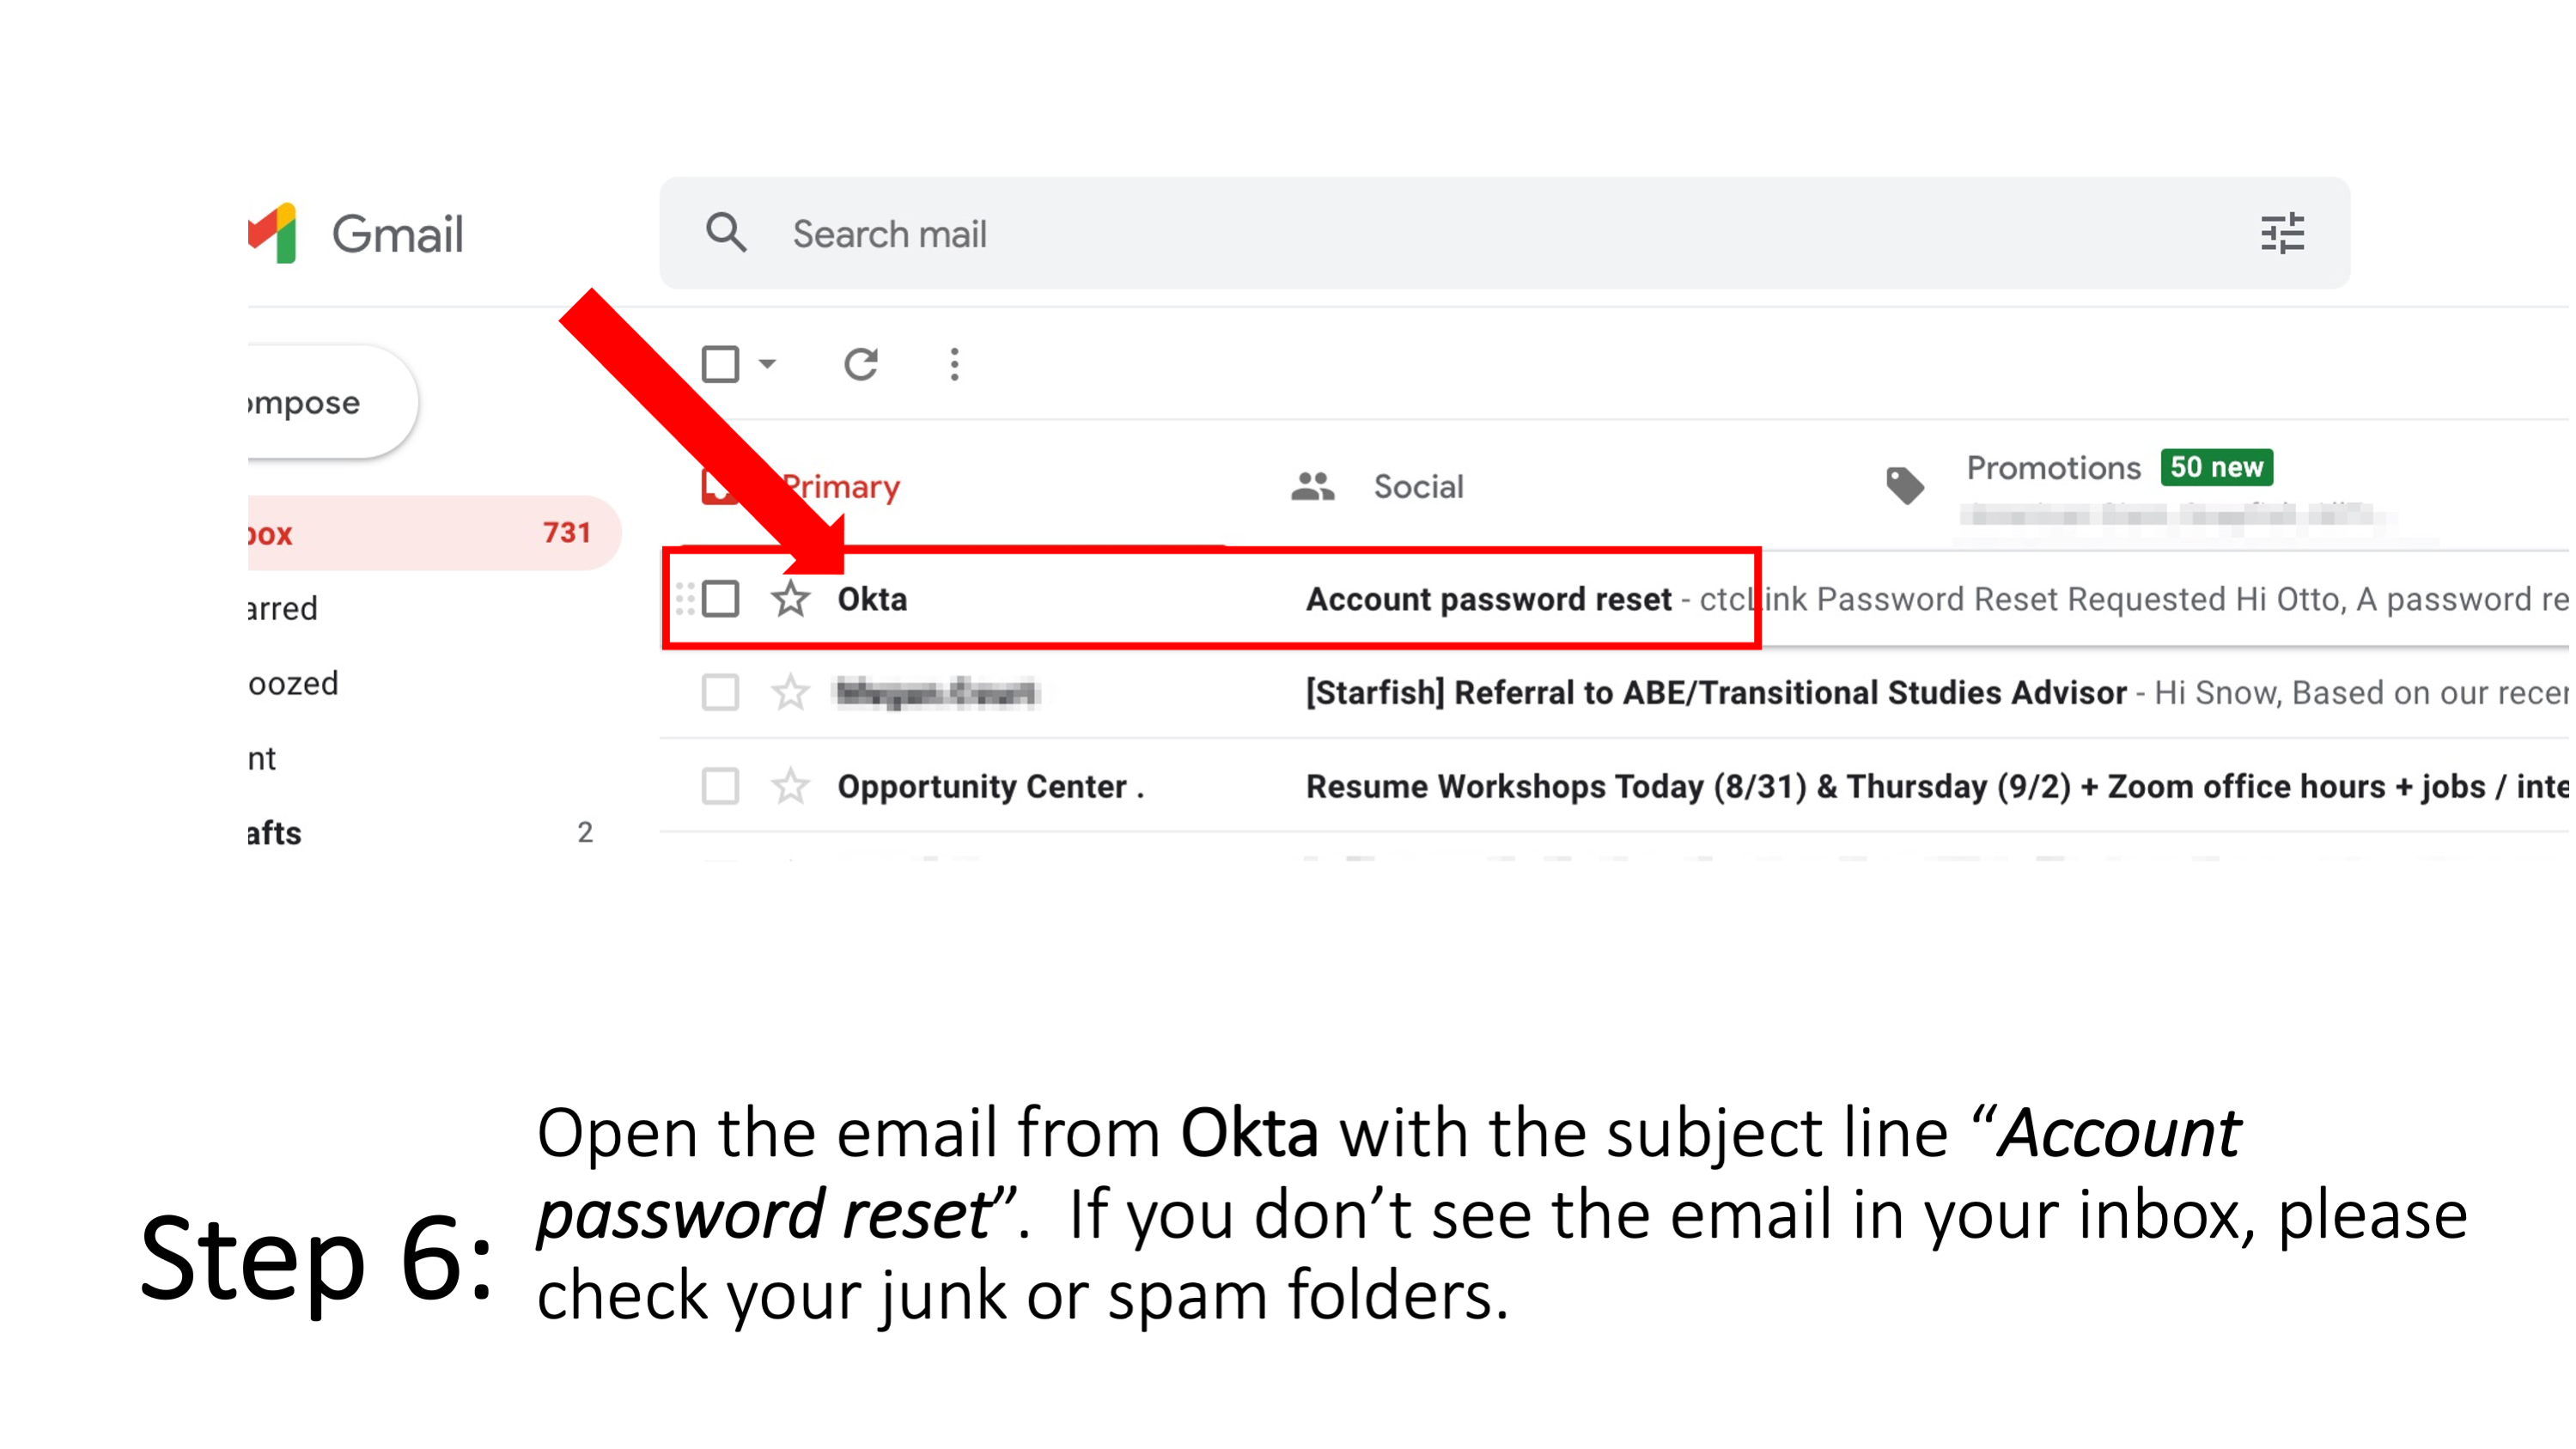 Step 6: Open the email from Okta with the subject line “Account password reset”.  If you don’t see the email in your inbox, please check your junk or spam folders.